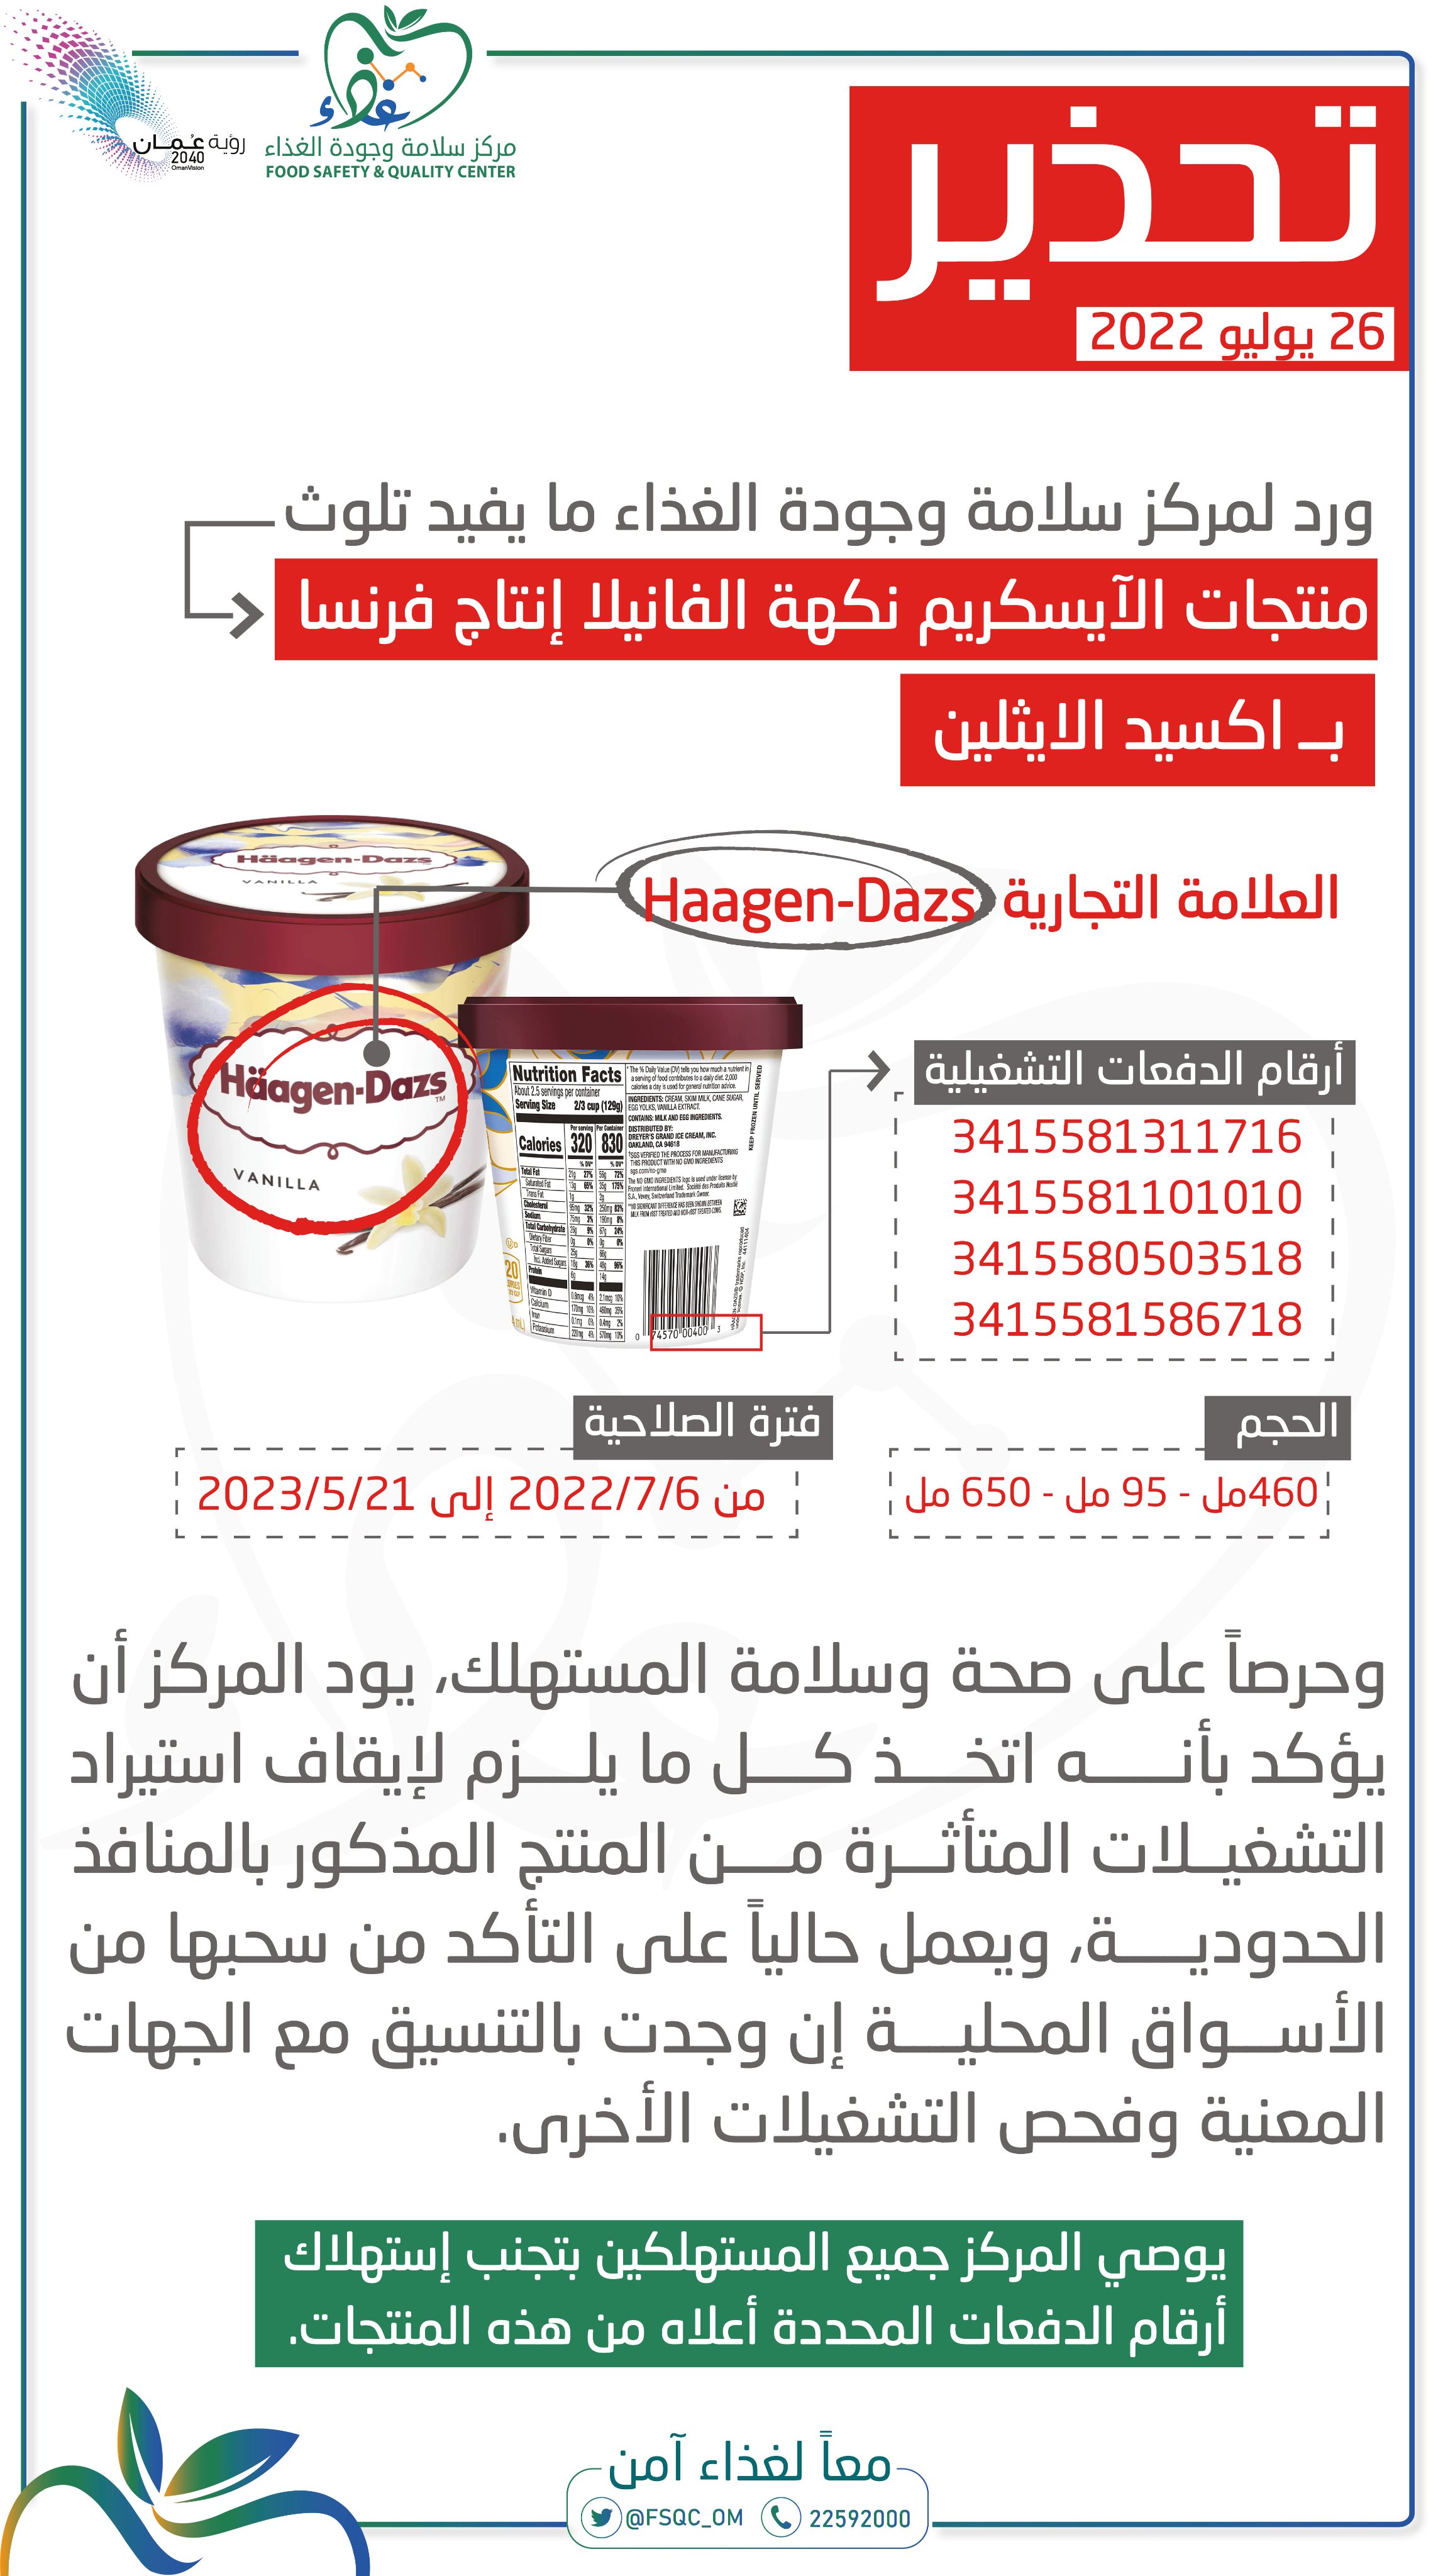 Oman Food Safety Authorities Warn About Contaminated Ice Cream Product  